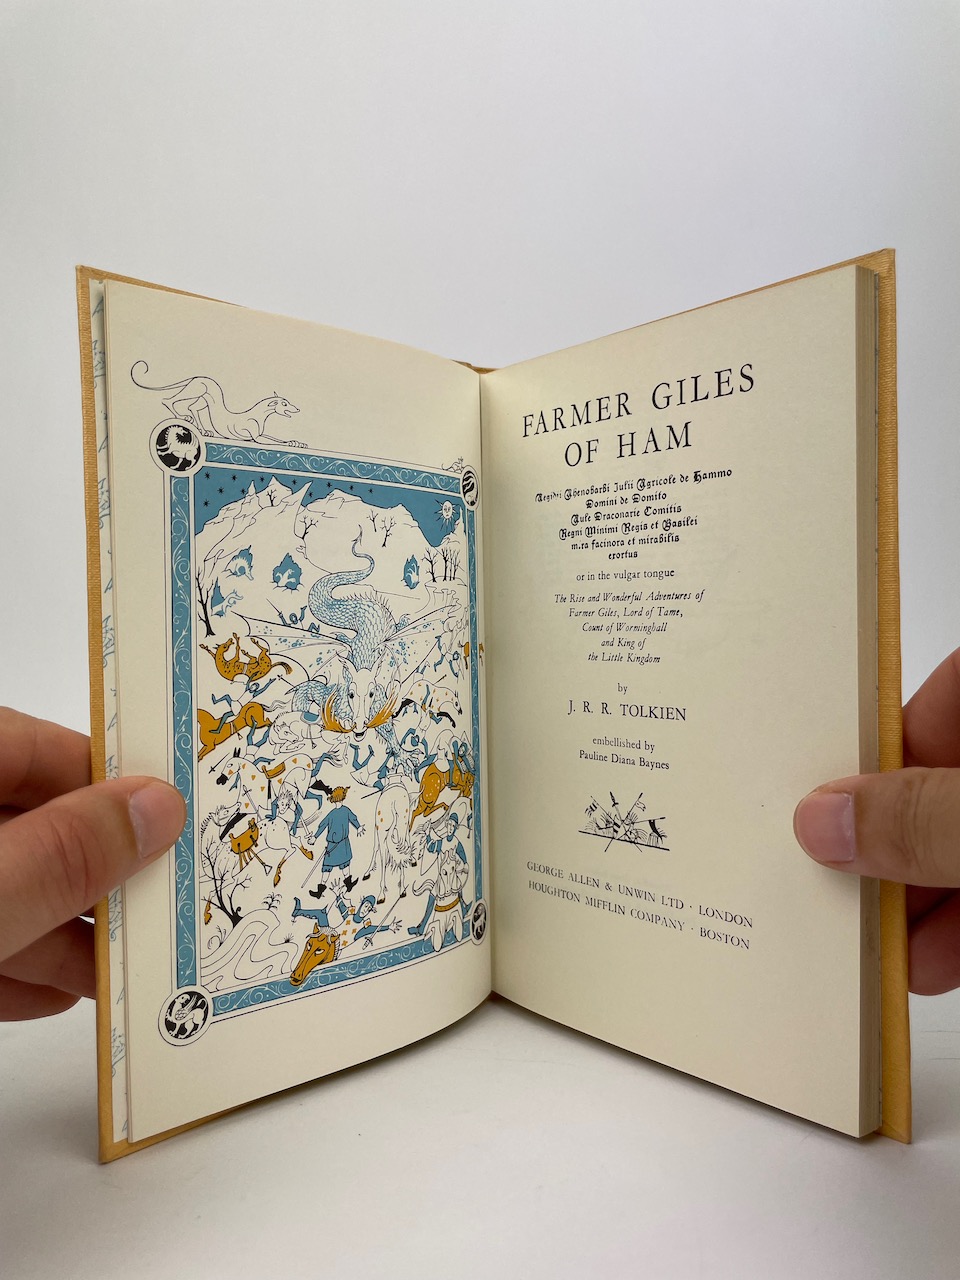 Farmer Giles of Ham, The Rise and Wonderful Adventures of Farmer Giles, 9th impression from 1972 12